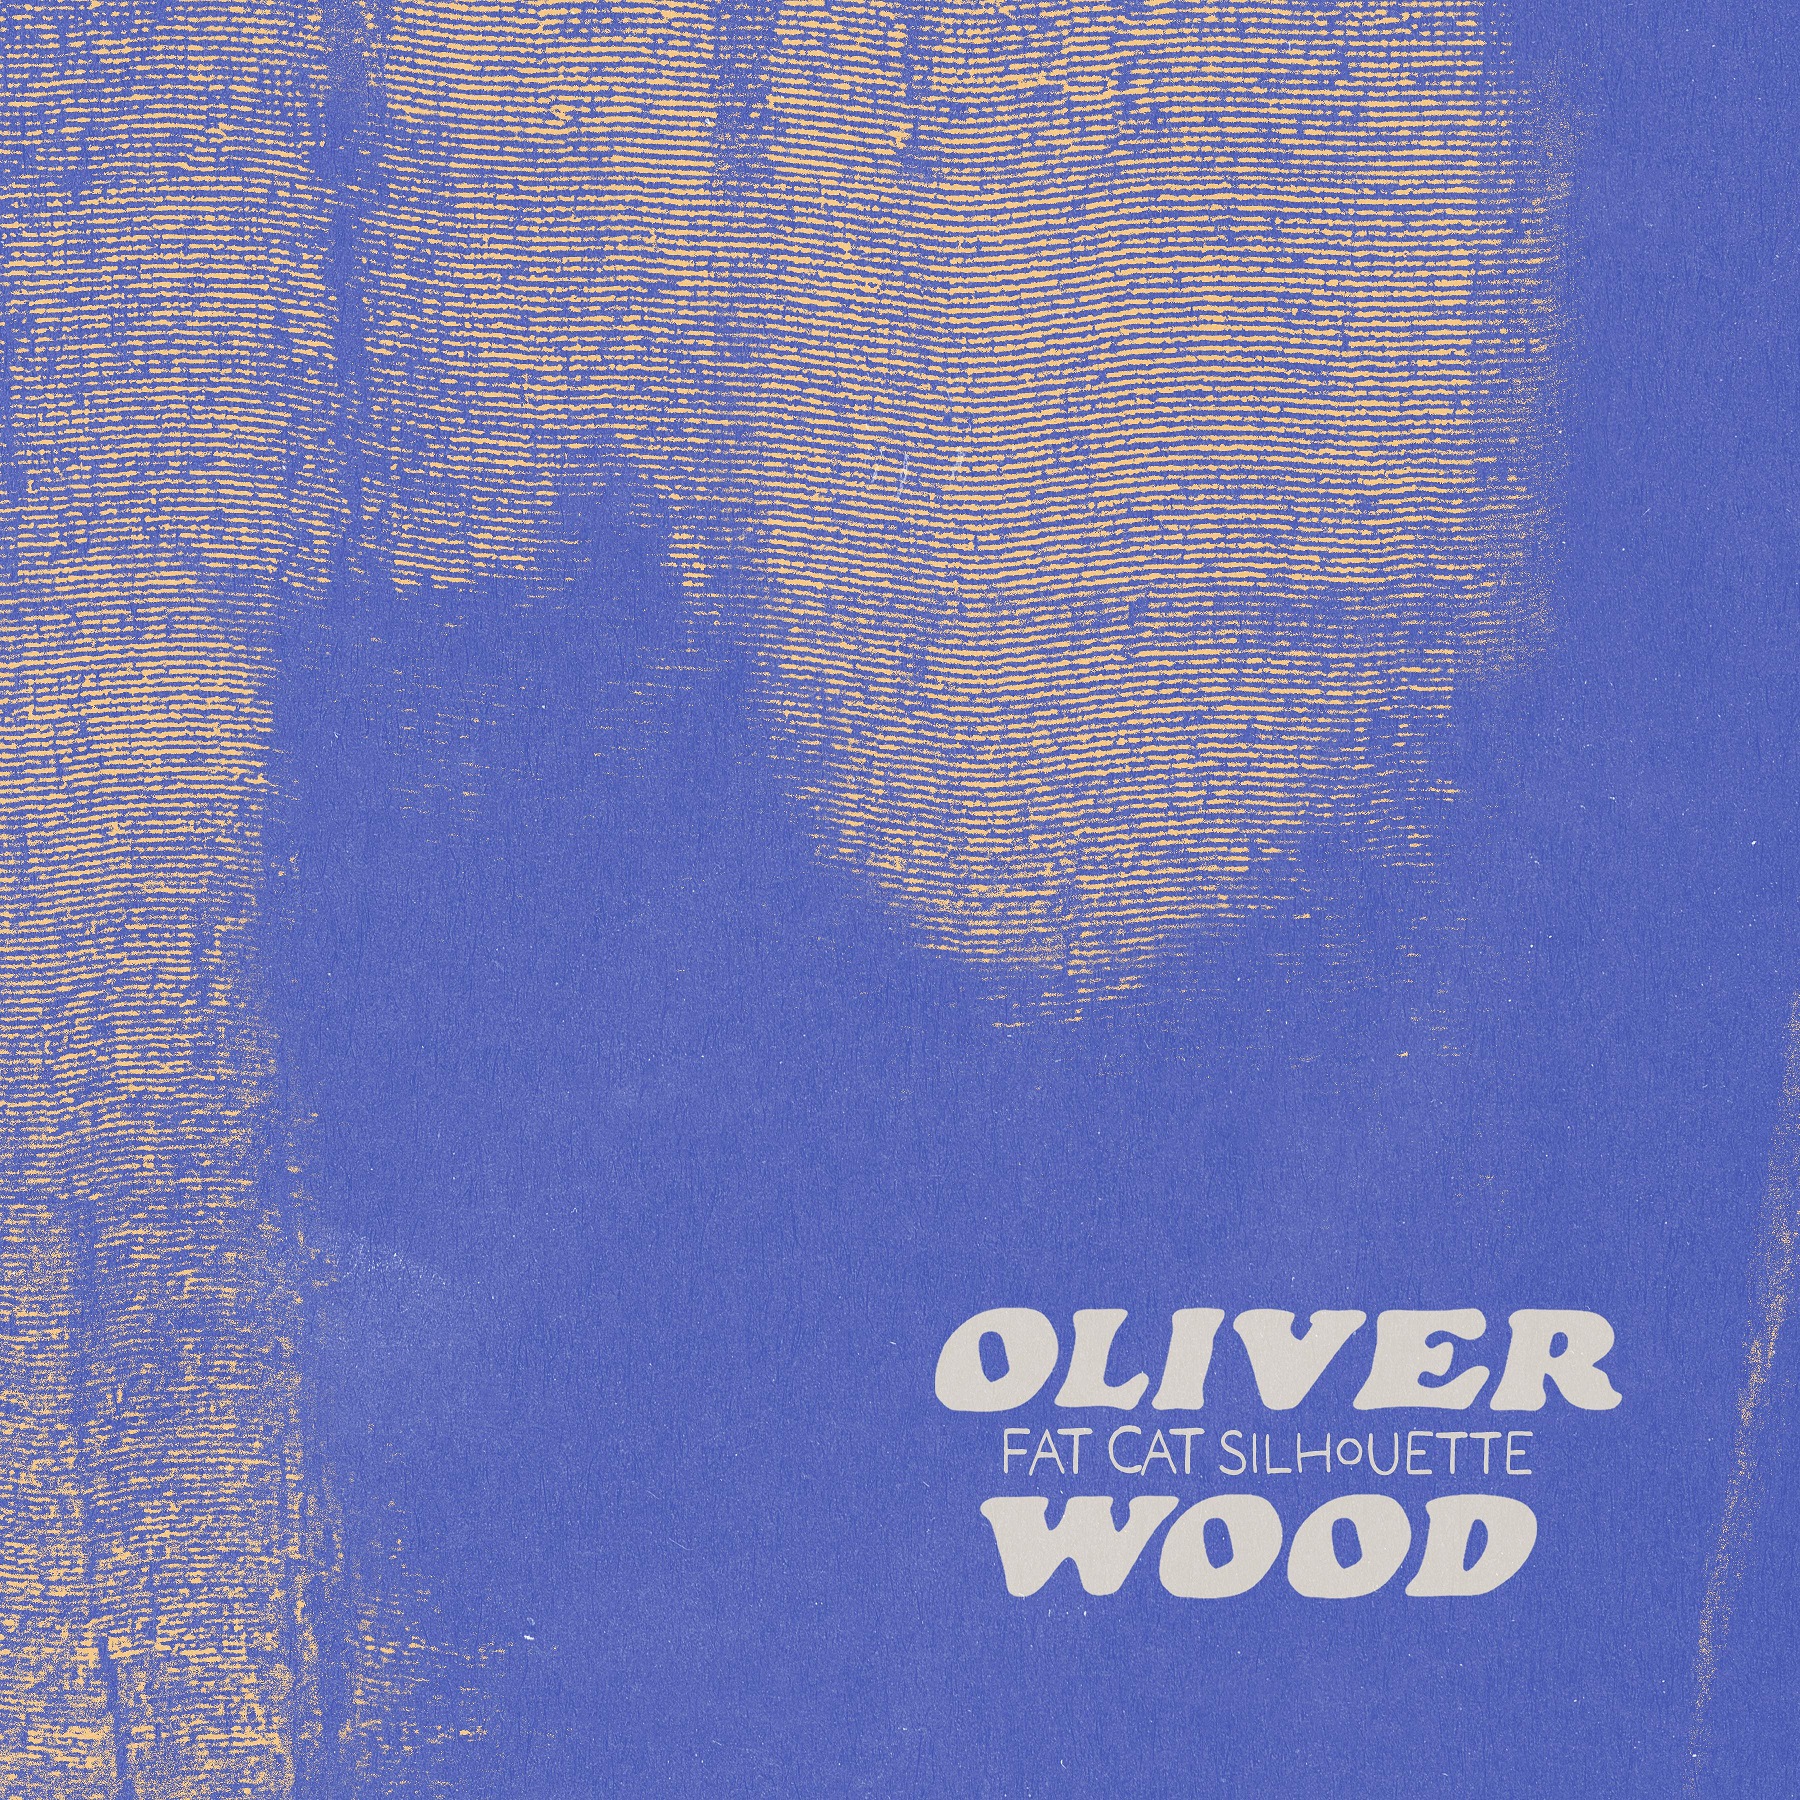 Oliver Wood's New Album 'Fat Cat Silhouette' Out Now